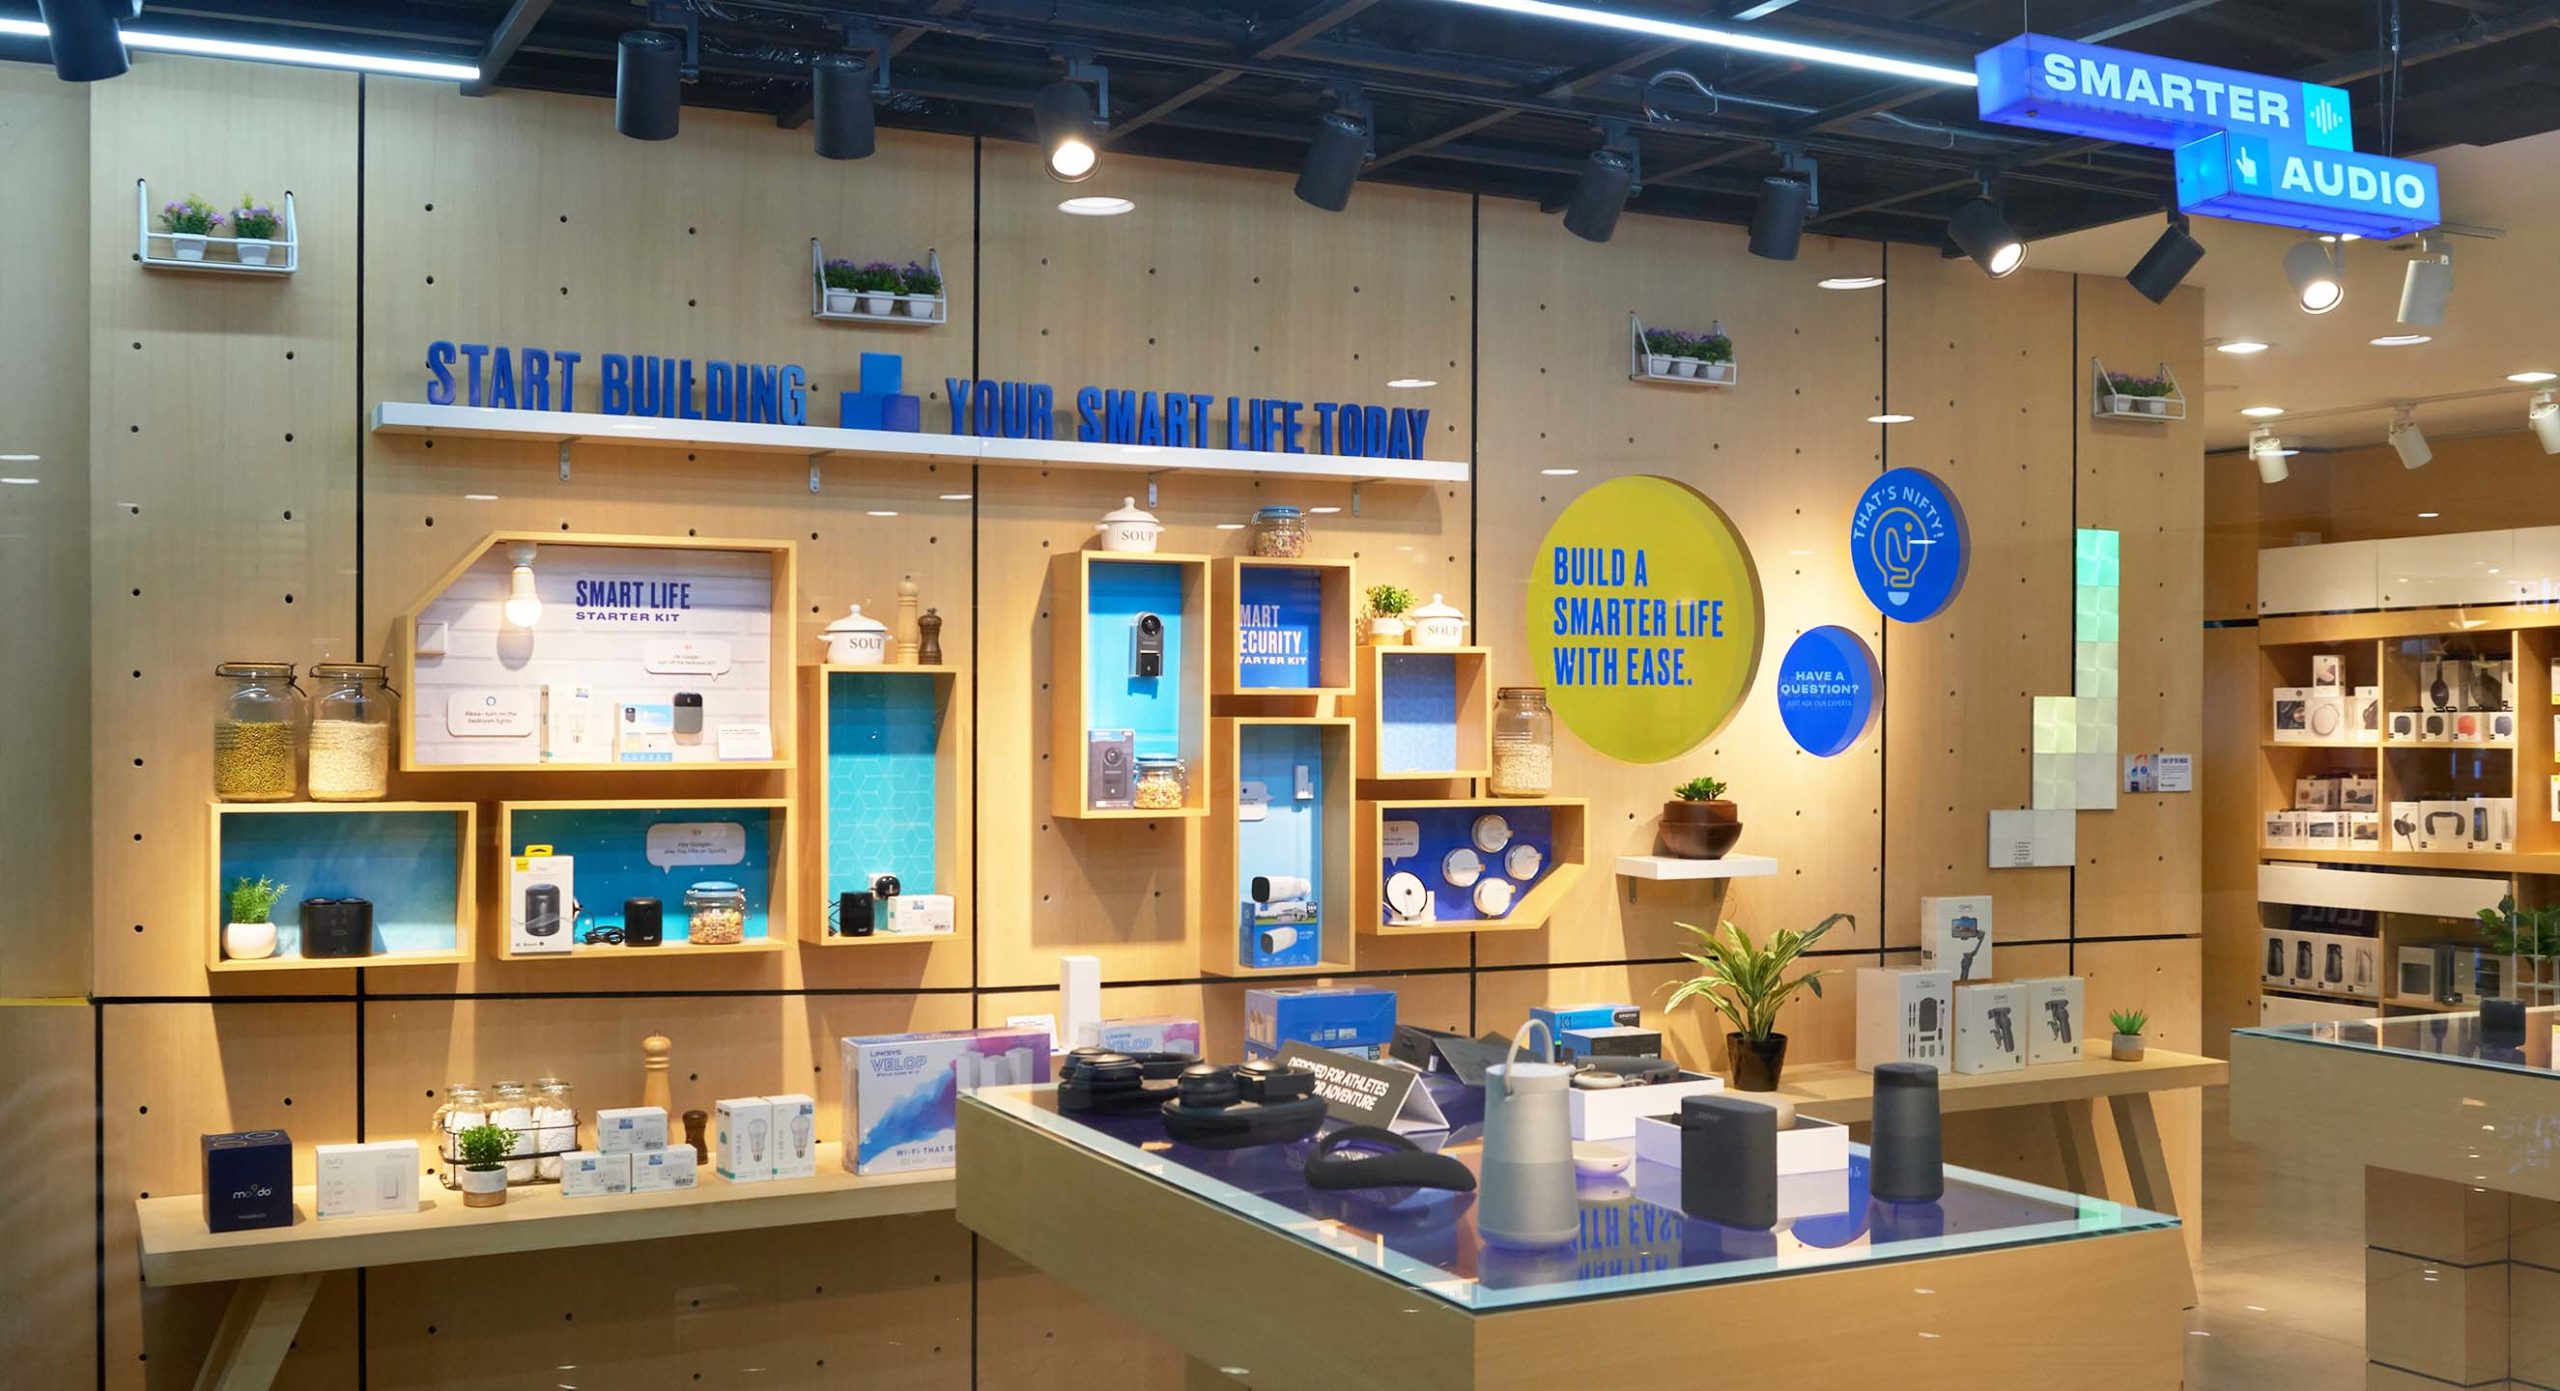 Minimal store environment design and display for retail tech brand Nifty